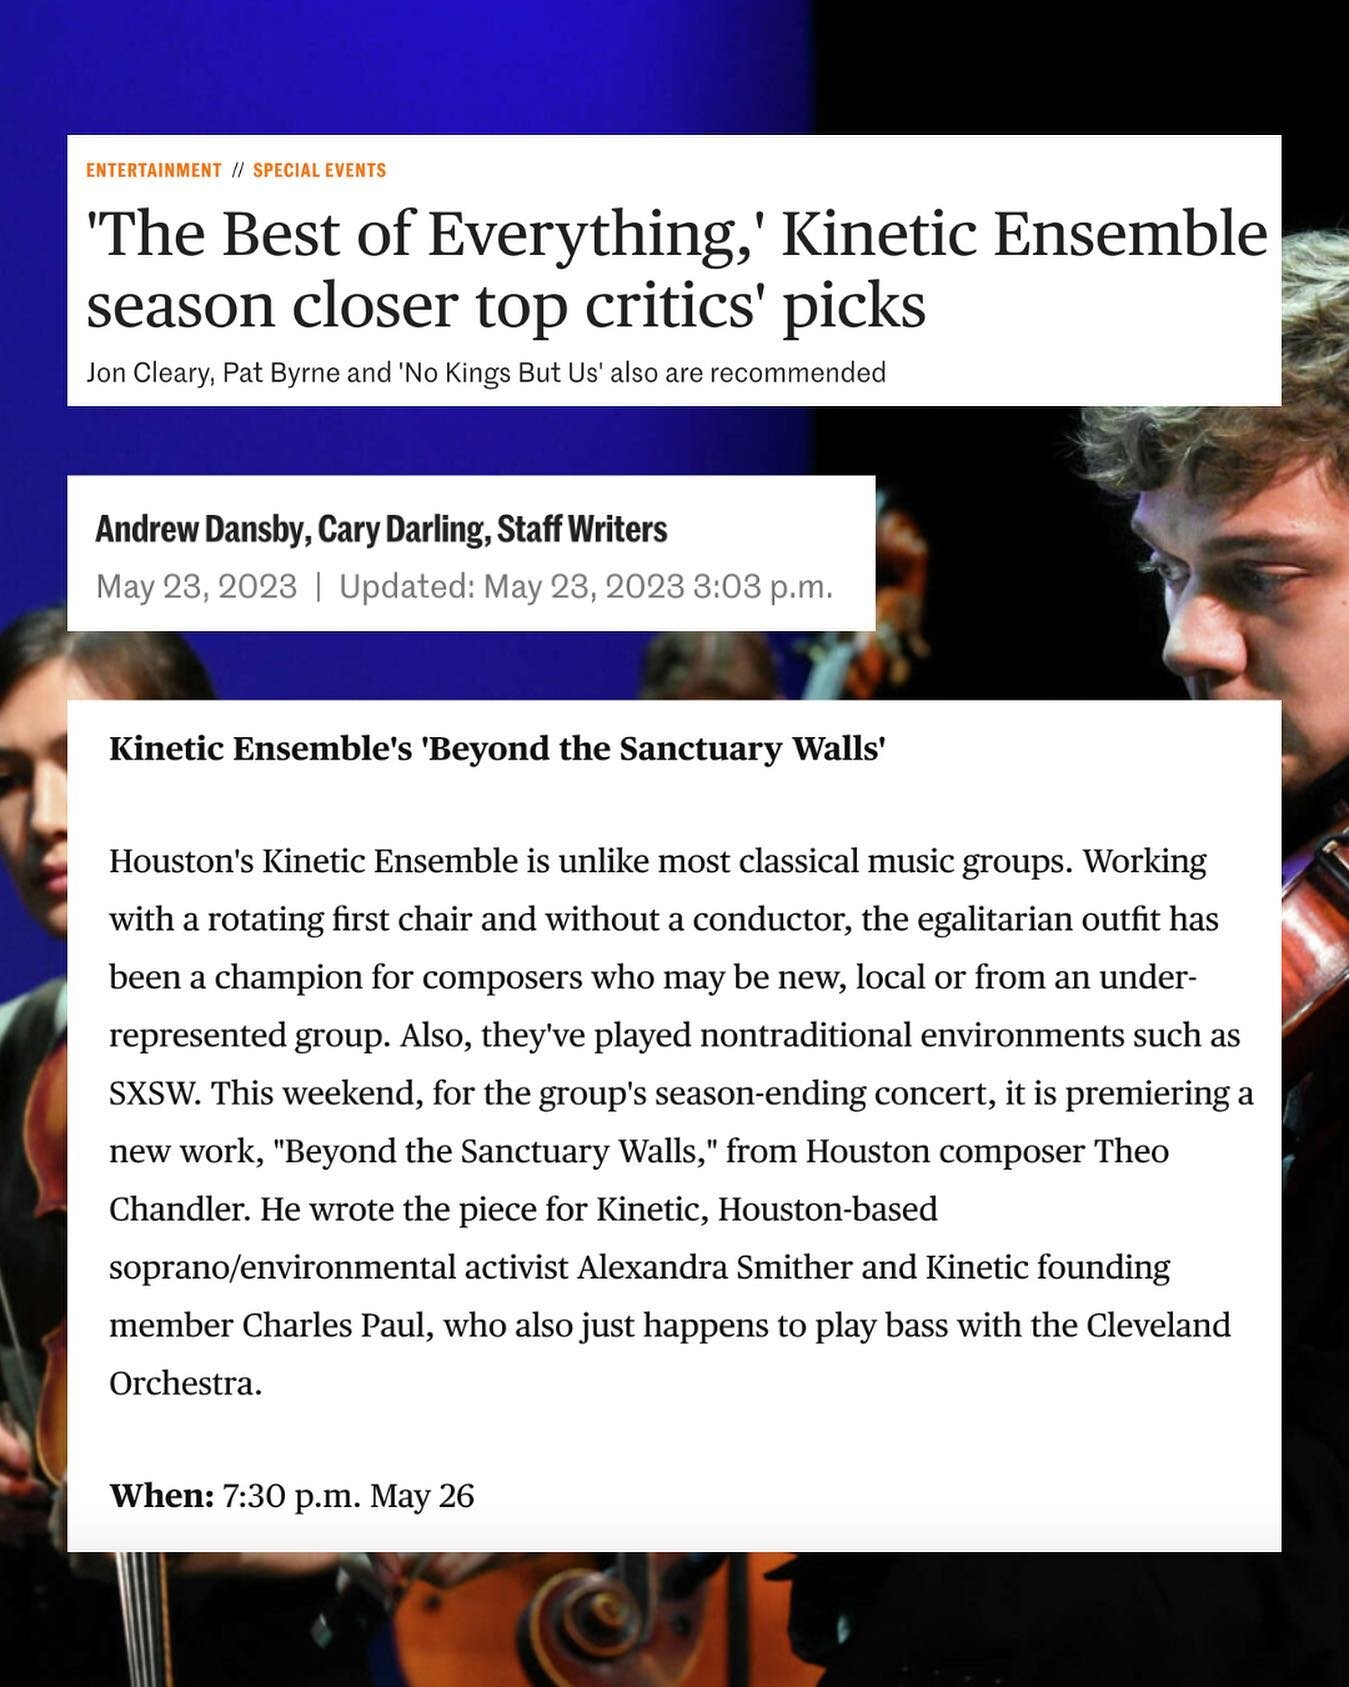 Our season closer is tomorrow night, and the @houstonchron named us &ldquo;The Best of Everything!&rdquo;

Come see what all the hype is about, with @alexandrasmither, @charles.paul.bass and @theochandlercomposer at @matchouston &mdash; tickets at th